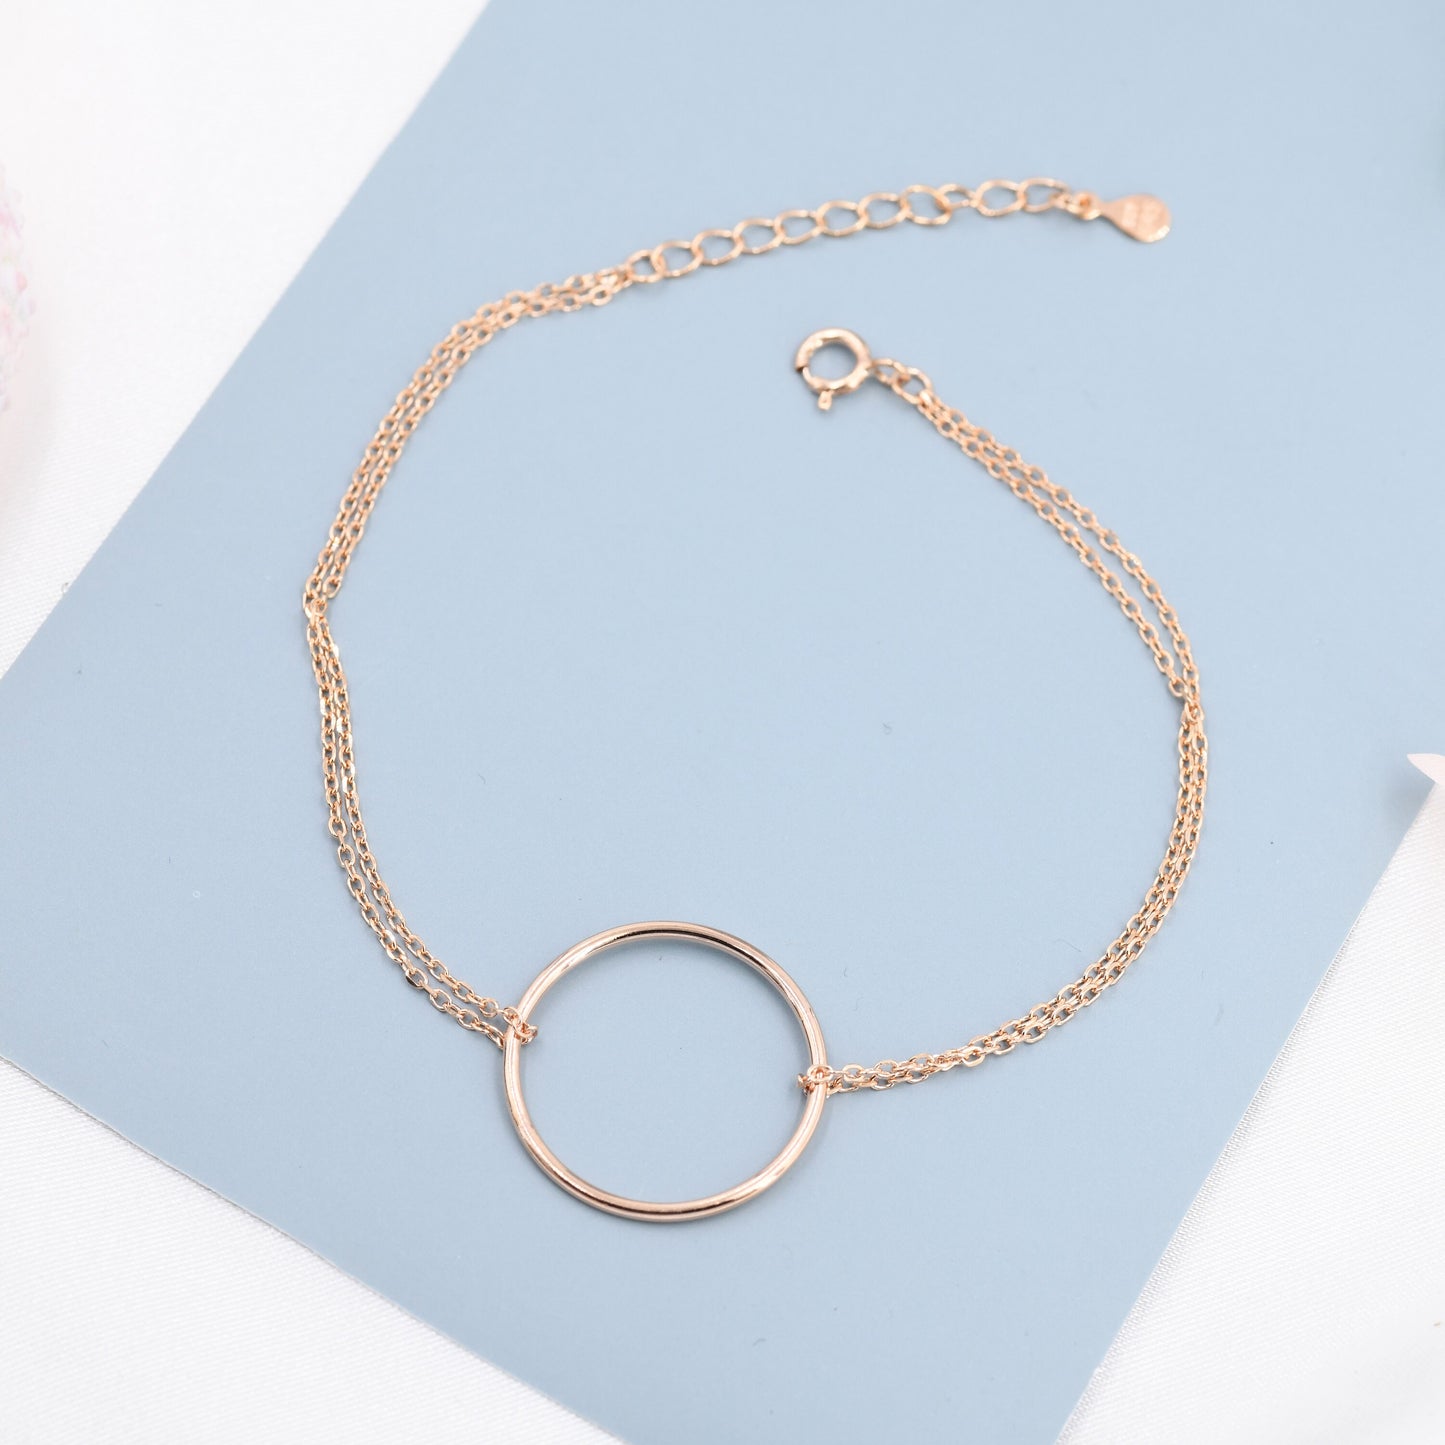 Open Circle Bracelet in Sterling Silver, Silver or Gold or Rose Gold,  Geometric Circle Bracelet, Minimalist Jewellery